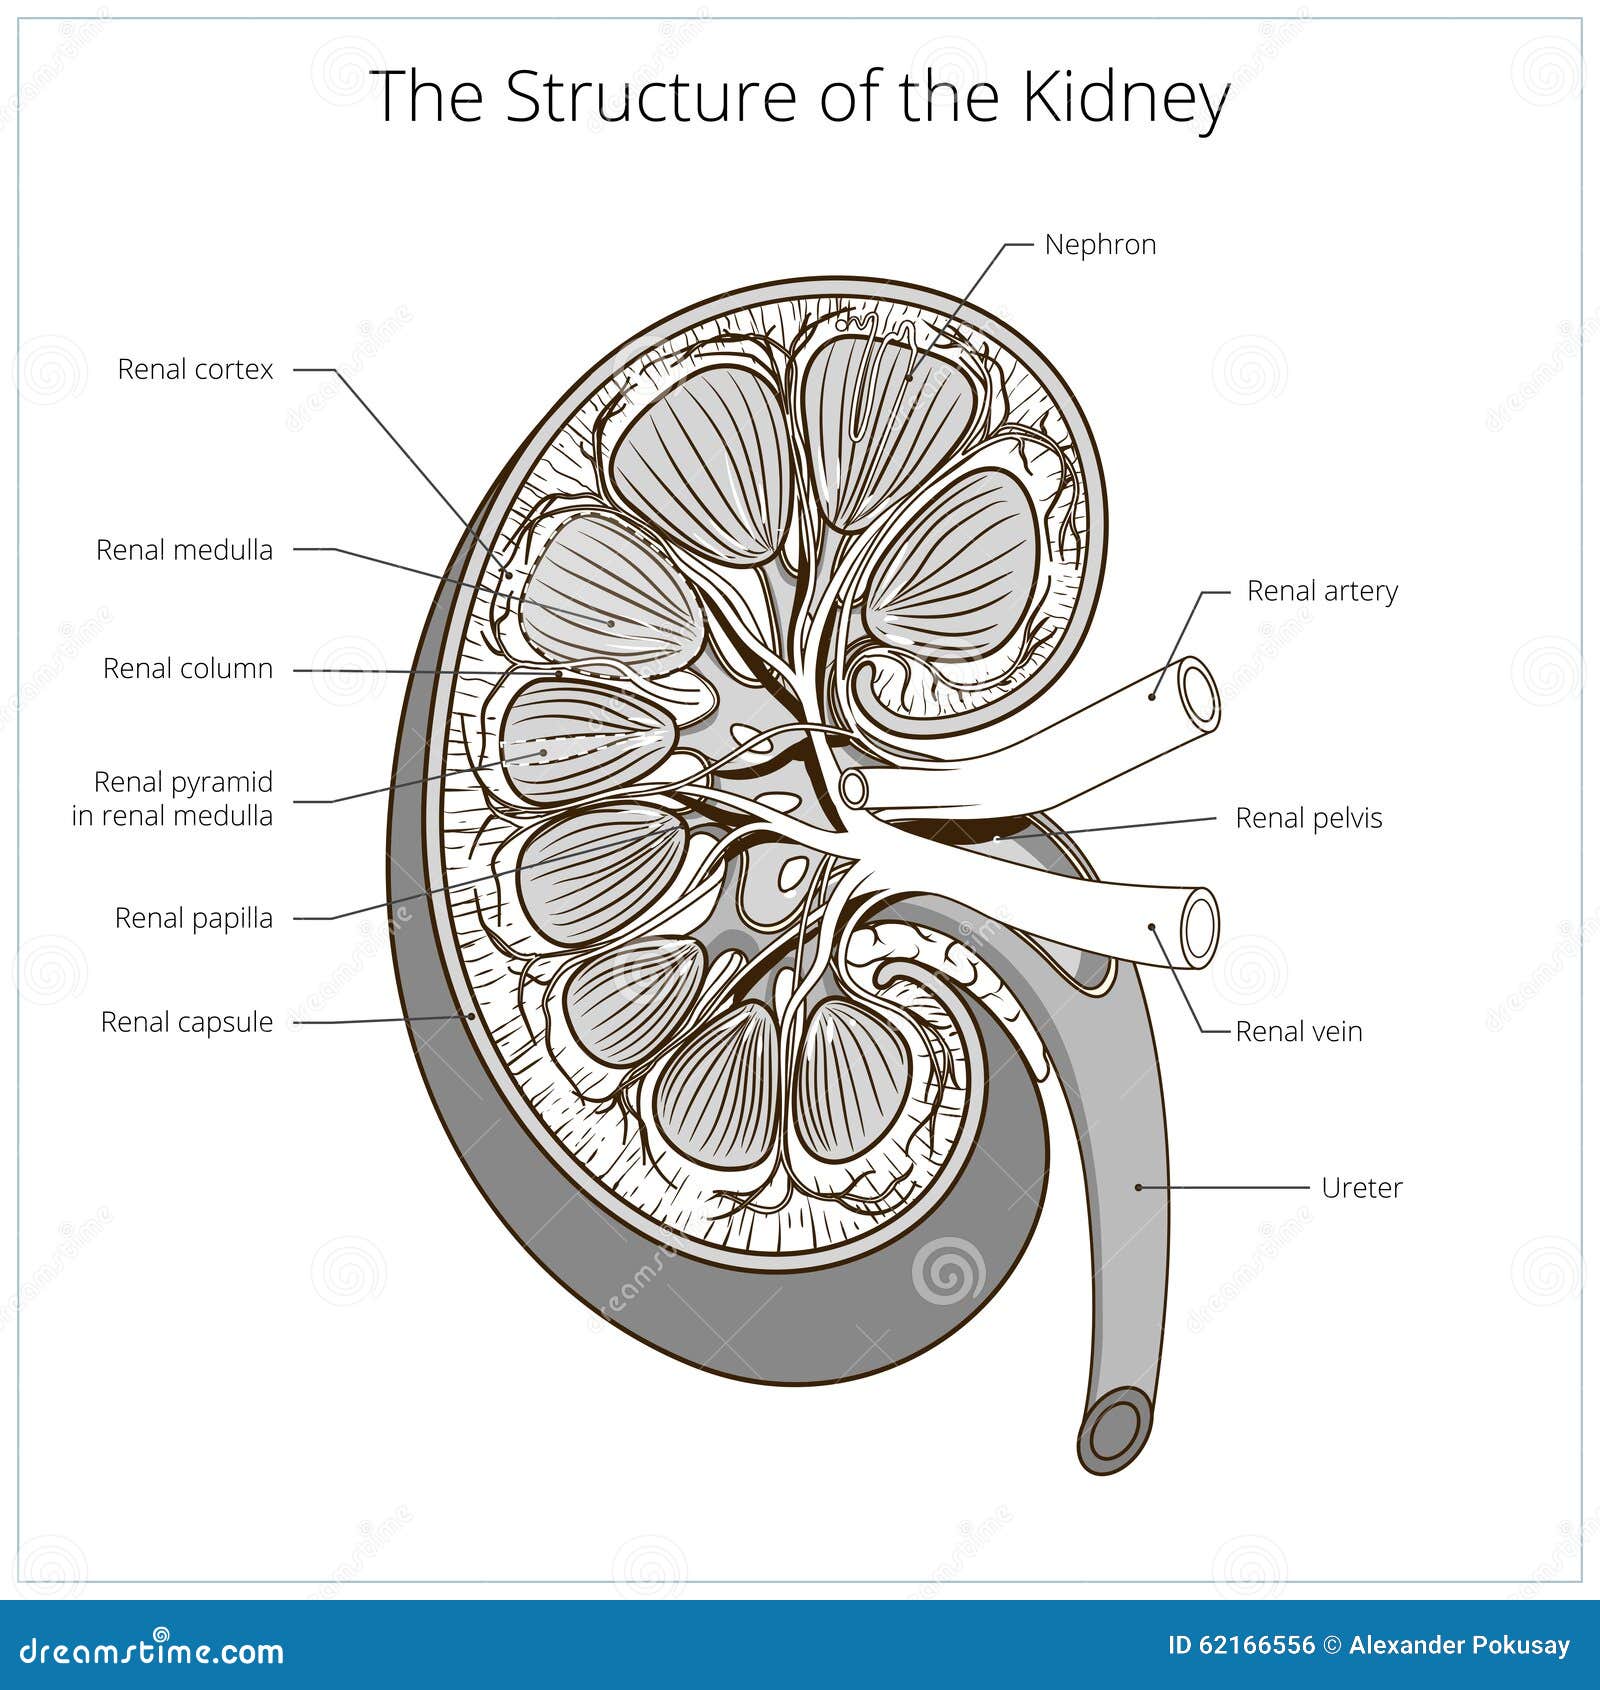 DRAW IT NEAT: How to draw LS of kidney